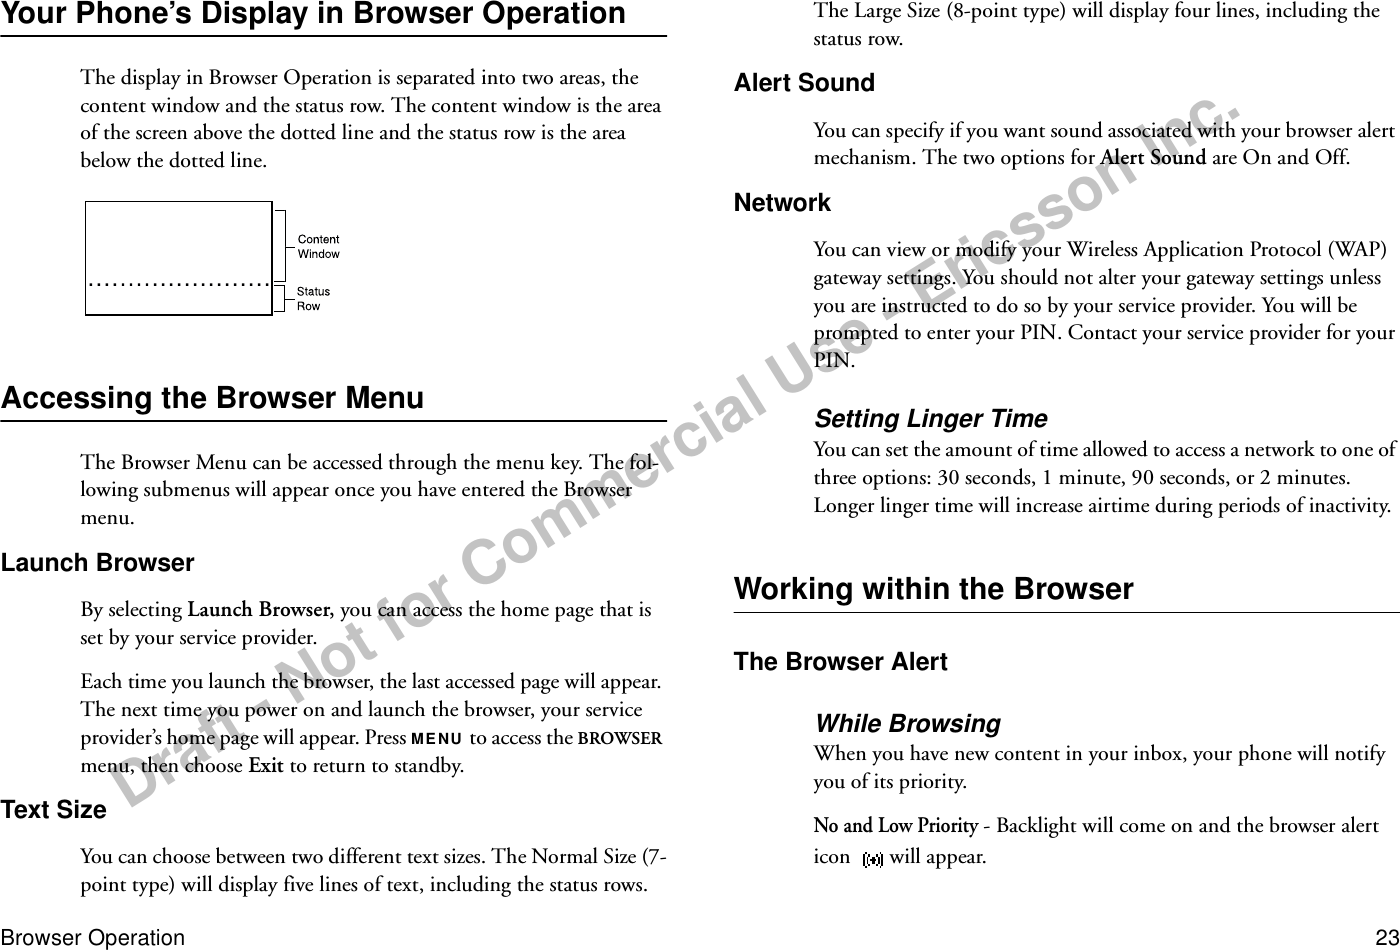 Draft - Not for Commercial Use - Ericsson Inc.Browser Operation 23Your Phone’s Display in Browser OperationThe display in Browser Operation is separated into two areas, the content window and the status row. The content window is the area of the screen above the dotted line and the status row is the area below the dotted line.Accessing the Browser MenuThe Browser Menu can be accessed through the menu key. The fol-lowing submenus will appear once you have entered the Browser menu.Launch BrowserBy selecting Launch Browser, you can access the home page that is set by your service provider. Each time you launch the browser, the last accessed page will appear. The next time you power on and launch the browser, your service provider’s home page will appear. Press MENU to access the BROWSER menu, then choose Exit to return to standby.Text SizeYou can choose between two different text sizes. The Normal Size (7-point type) will display five lines of text, including the status rows. The Large Size (8-point type) will display four lines, including the status row.Alert SoundYou can specify if you want sound associated with your browser alert mechanism. The two options for Alert Sound are On and Off.NetworkYou can view or modify your Wireless Application Protocol (WAP) gateway settings. You should not alter your gateway settings unless you are instructed to do so by your service provider. You will be prompted to enter your PIN. Contact your service provider for your PIN.Setting Linger TimeYou can set the amount of time allowed to access a network to one of three options: 30 seconds, 1 minute, 90 seconds, or 2 minutes. Longer linger time will increase airtime during periods of inactivity. Working within the BrowserThe Browser AlertWhile BrowsingWhen you have new content in your inbox, your phone will notify you of its priority. No and Low Priority - Backlight will come on and the browser alert icon  will appear.